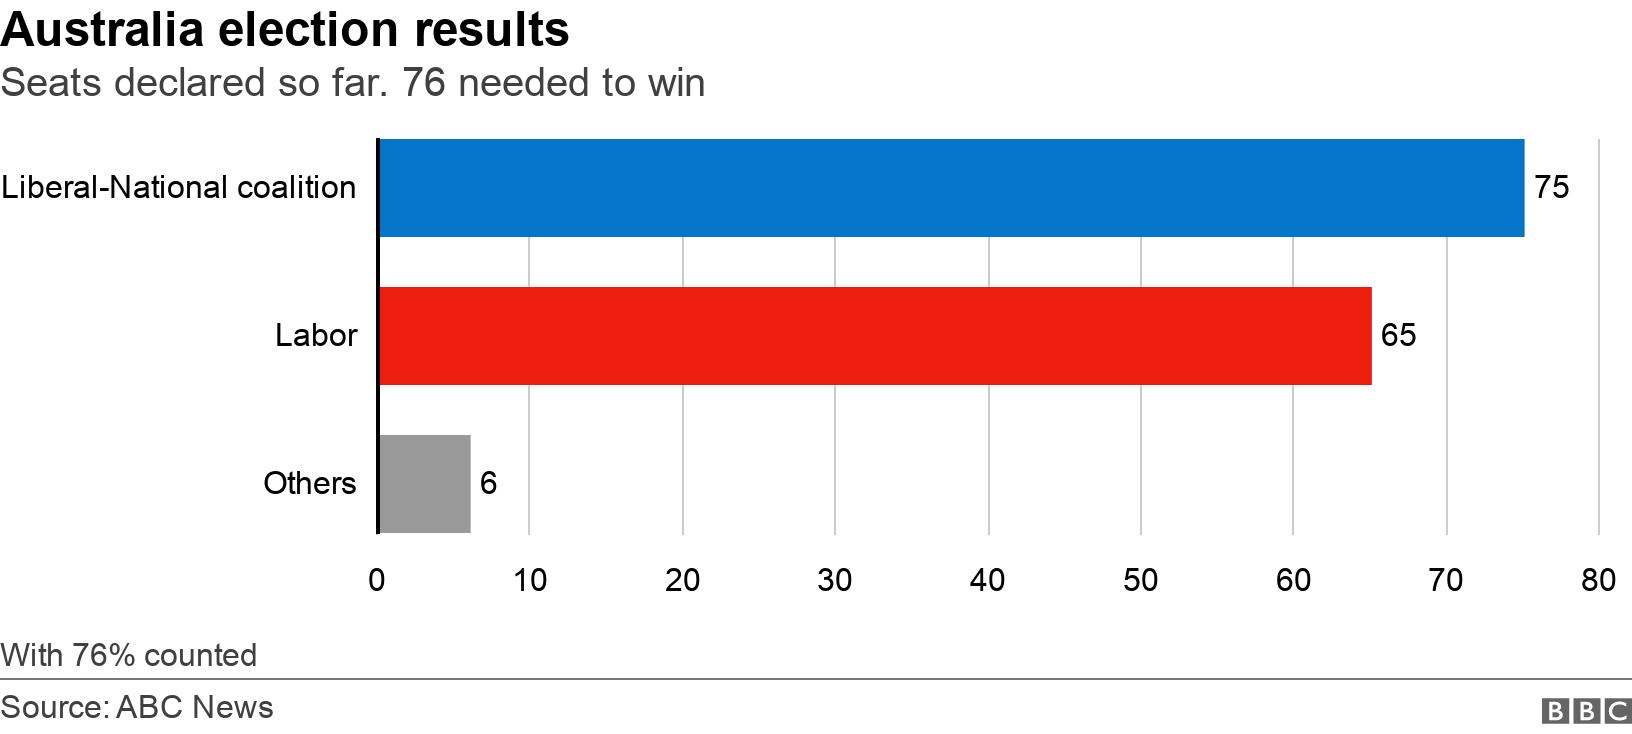 Australia election results. Seats declared so far. 76 needed to win.  With 76% counted.